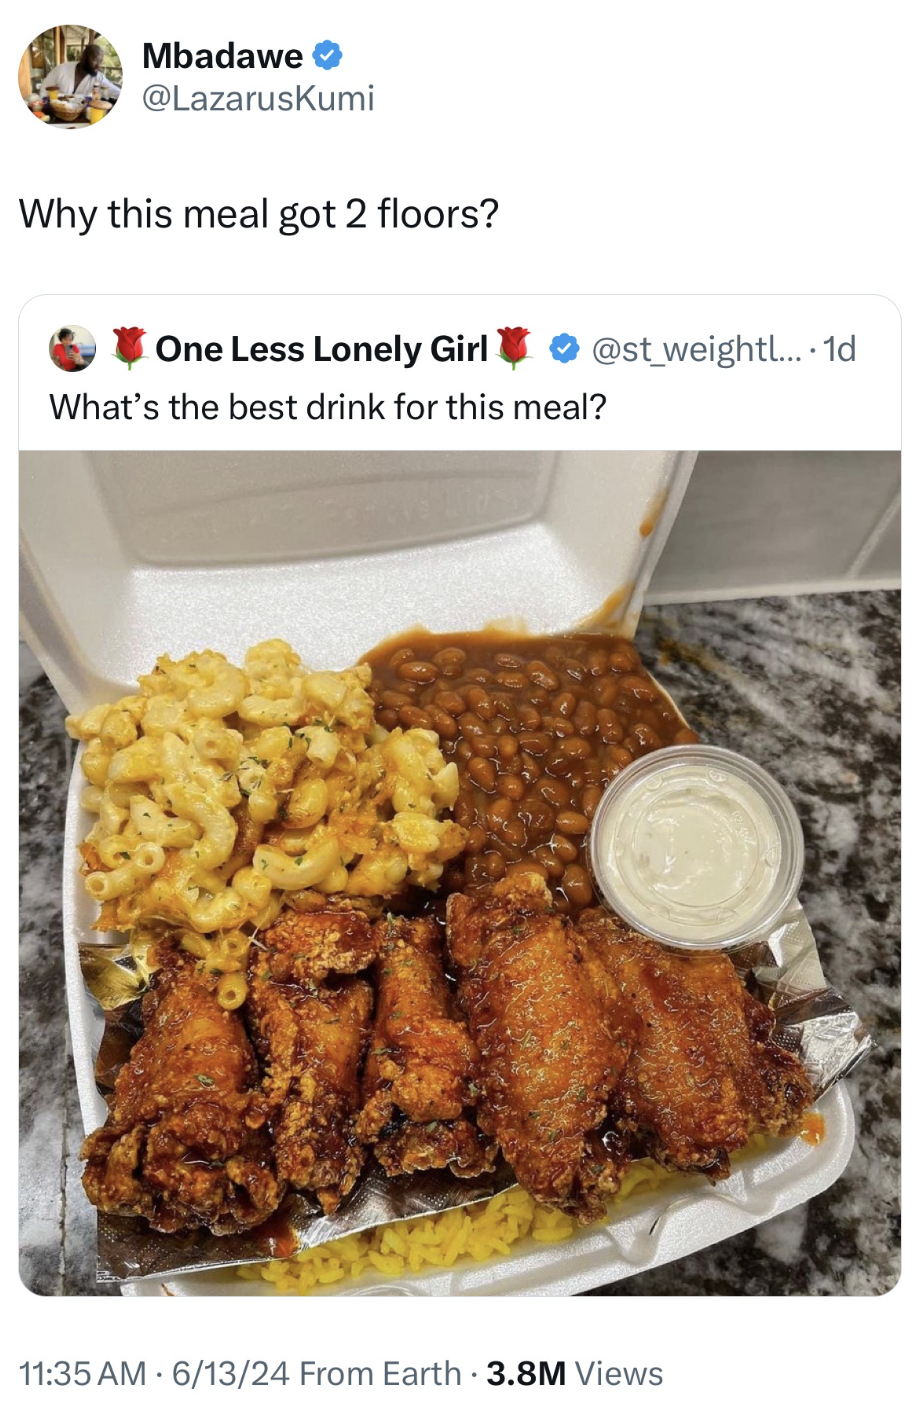 fish fry - Mbadawe Why this meal got 2 floors? One Less Lonely Girl weight... 1d What's the best drink for this meal? 61324 From Earth 3.8M Views